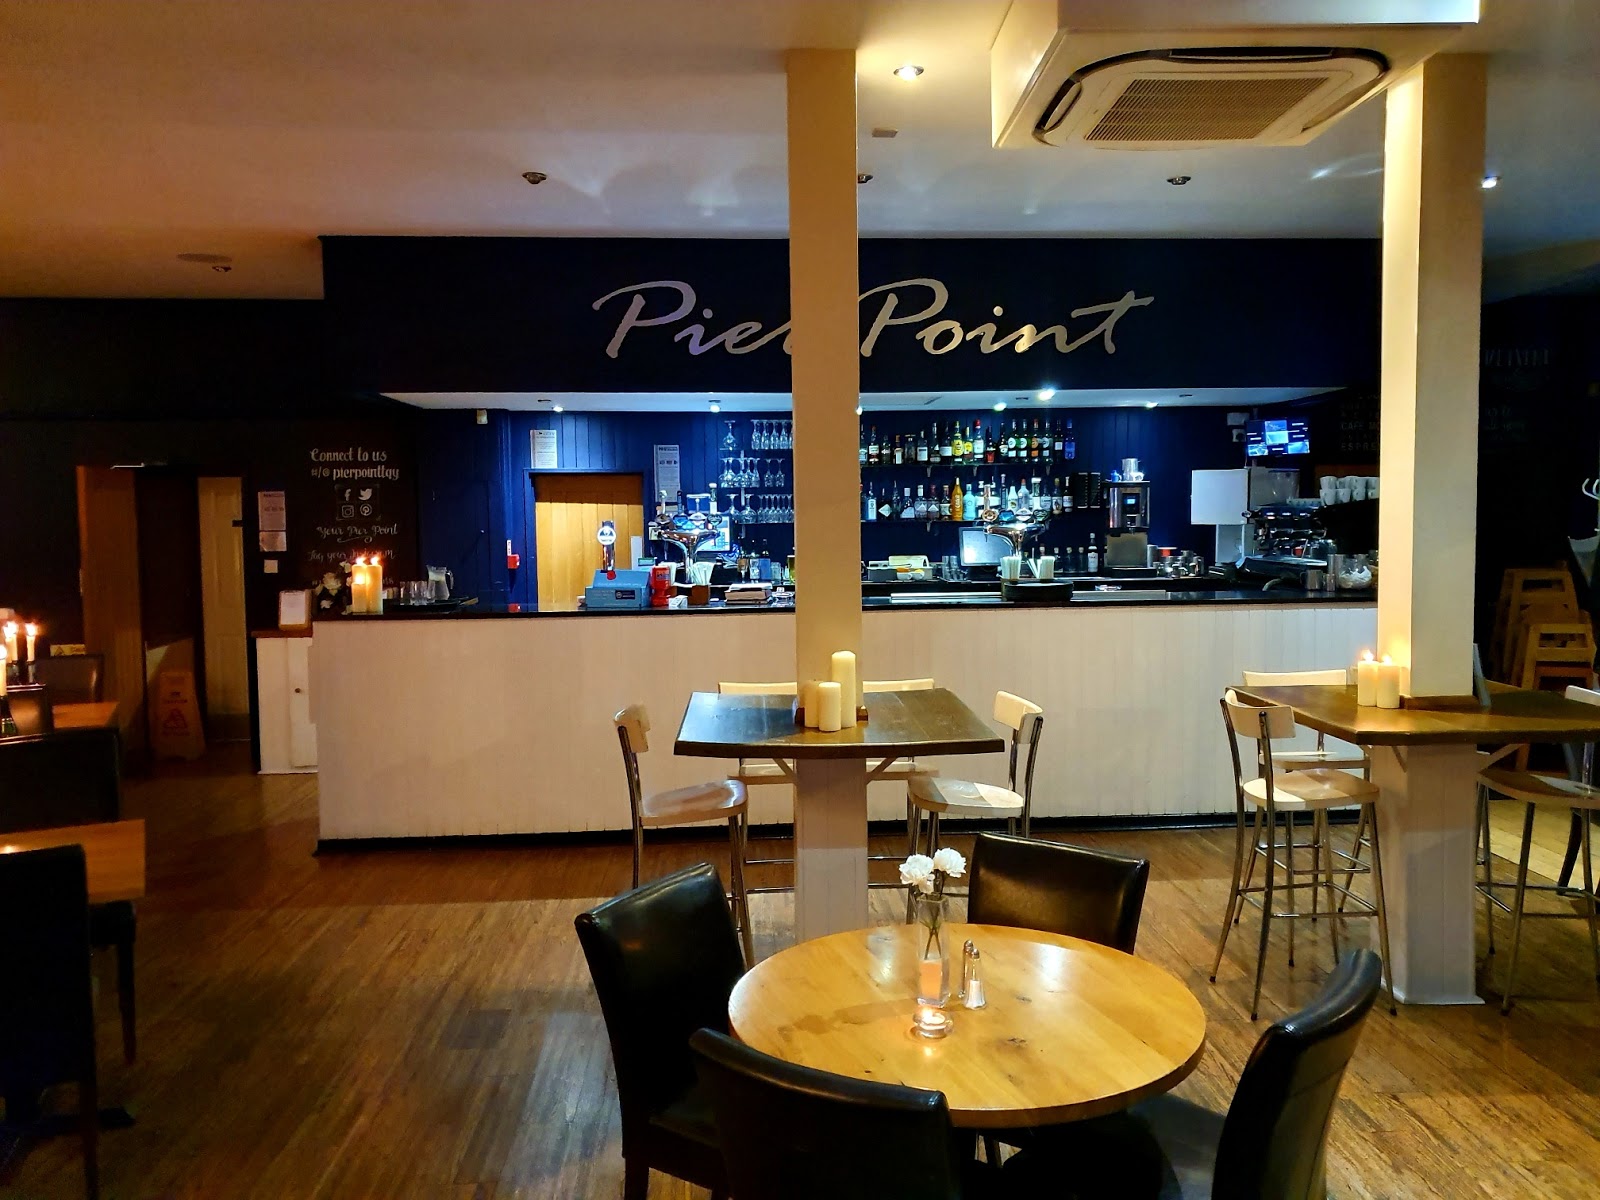 Let's Get to the Point - Pier Point Restaurant and Bar, Torquay